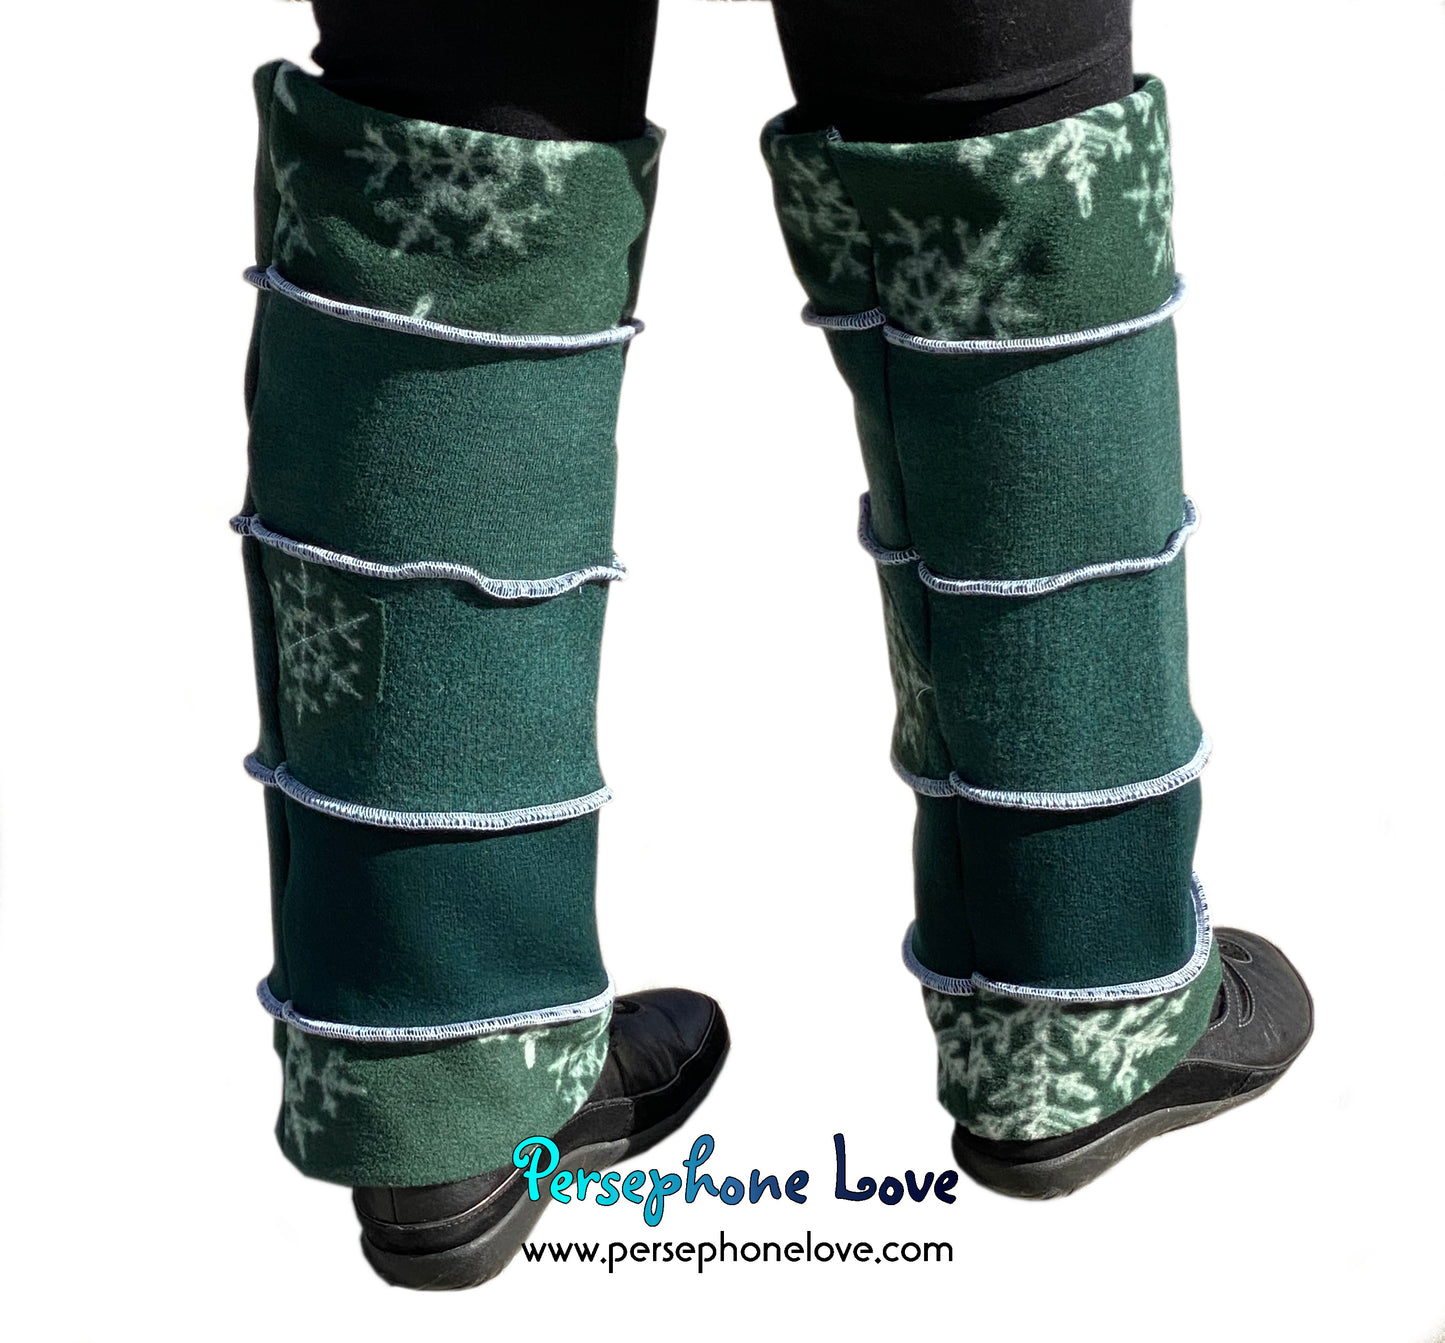 Katwise-inspired 100% felted cashmere leg warmers-1531